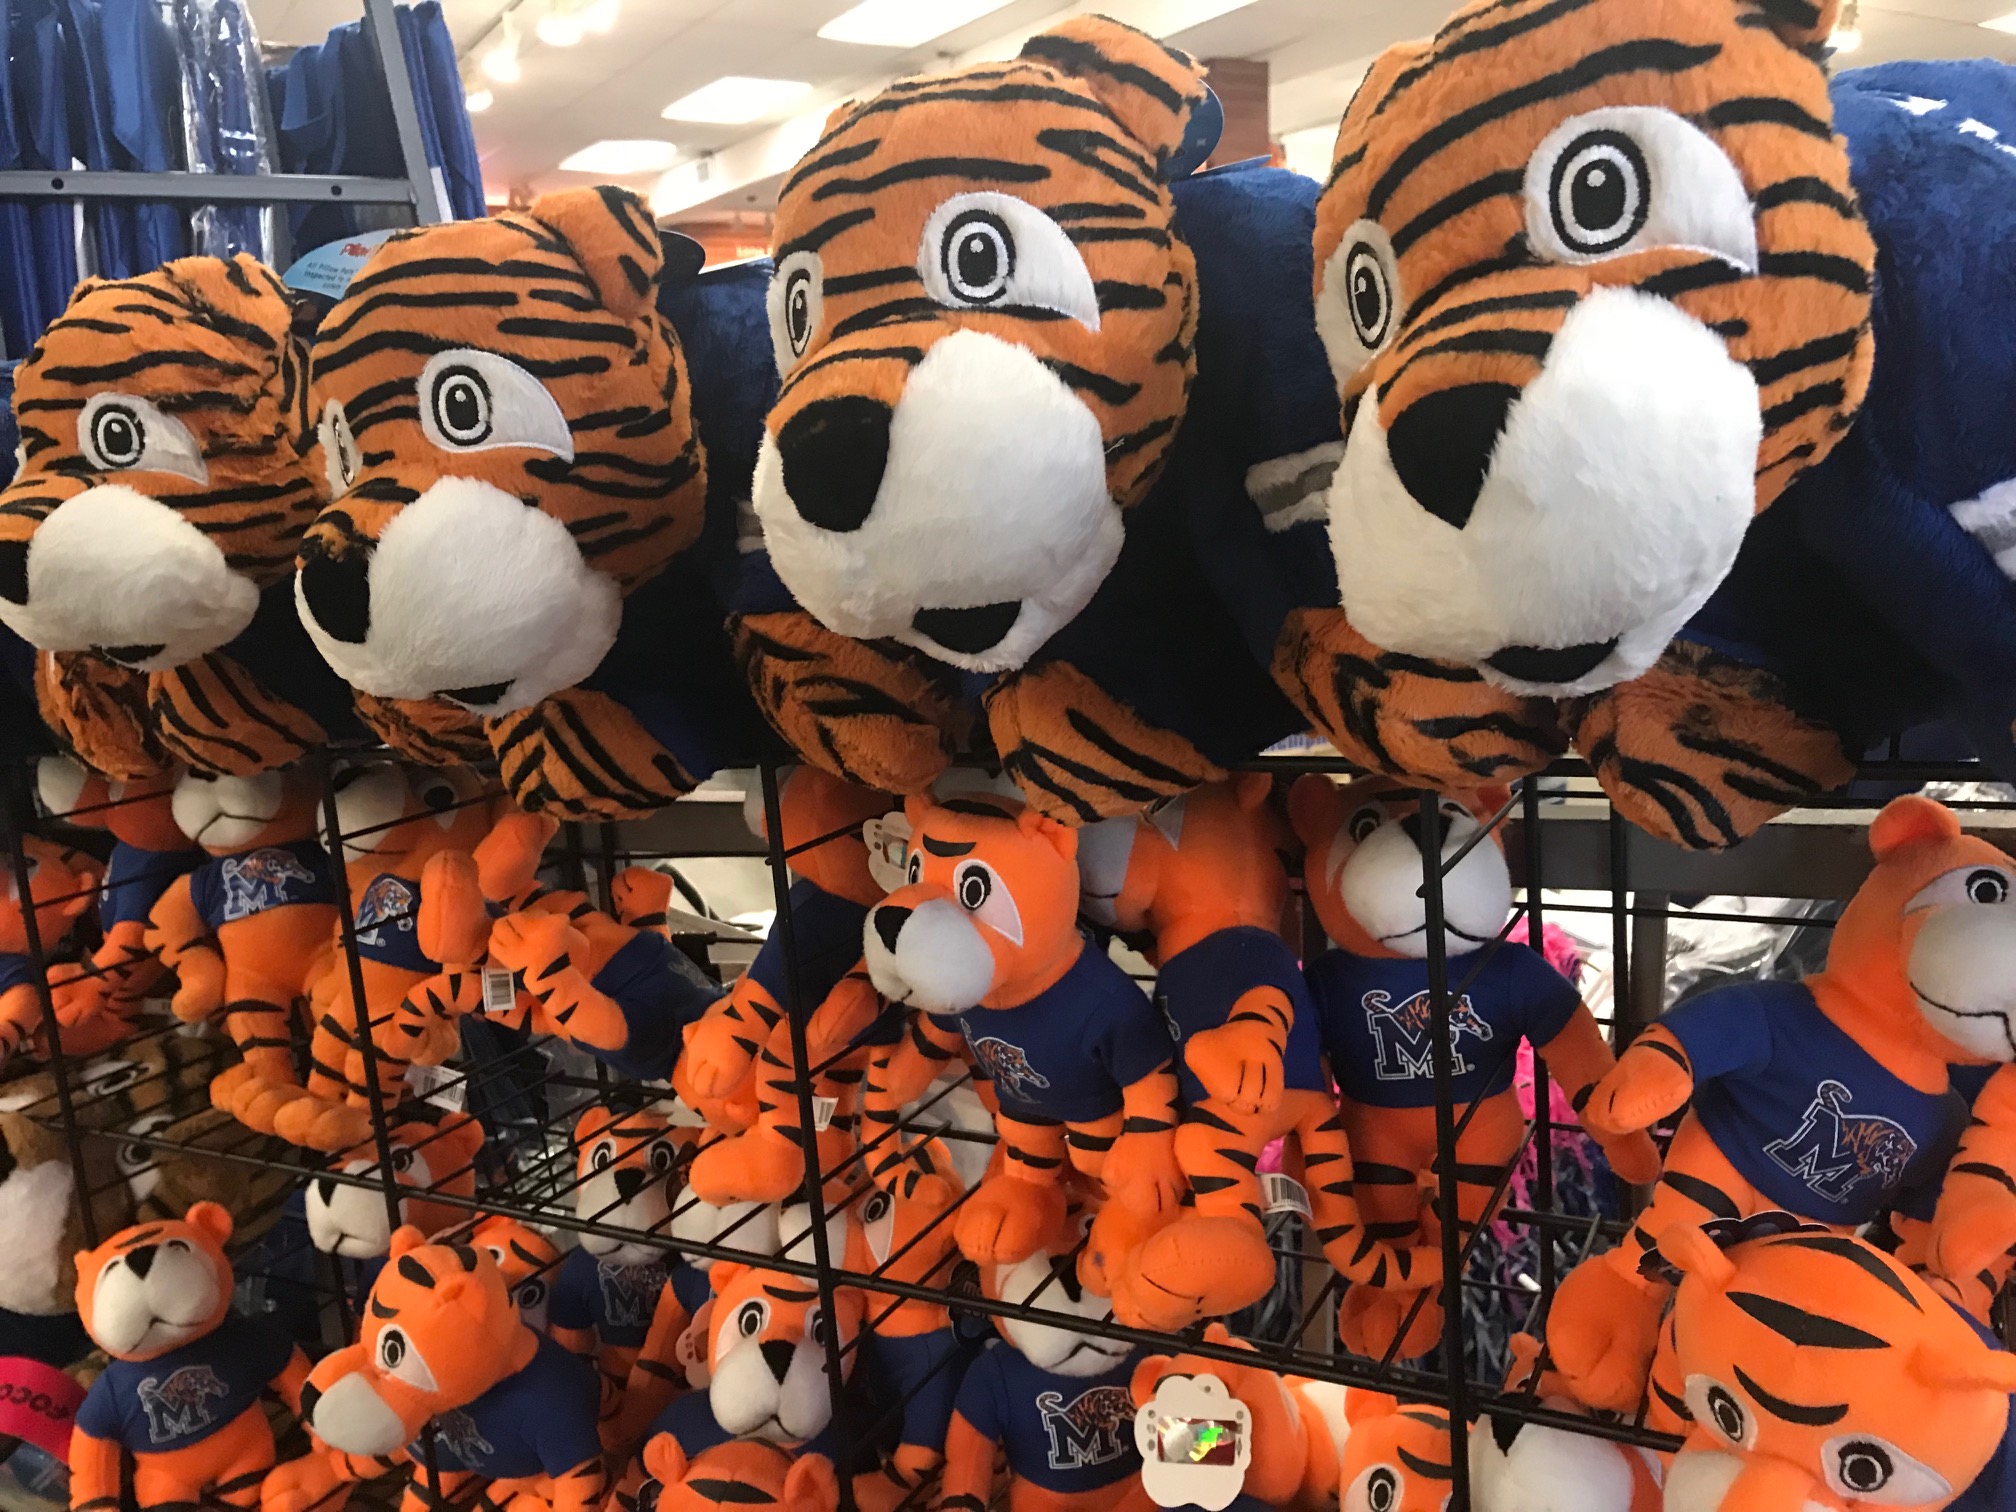 At Tiger Bookstore, Tigers branded merchandise accounts for 40 percent of gross sales. (Cole Bradley)